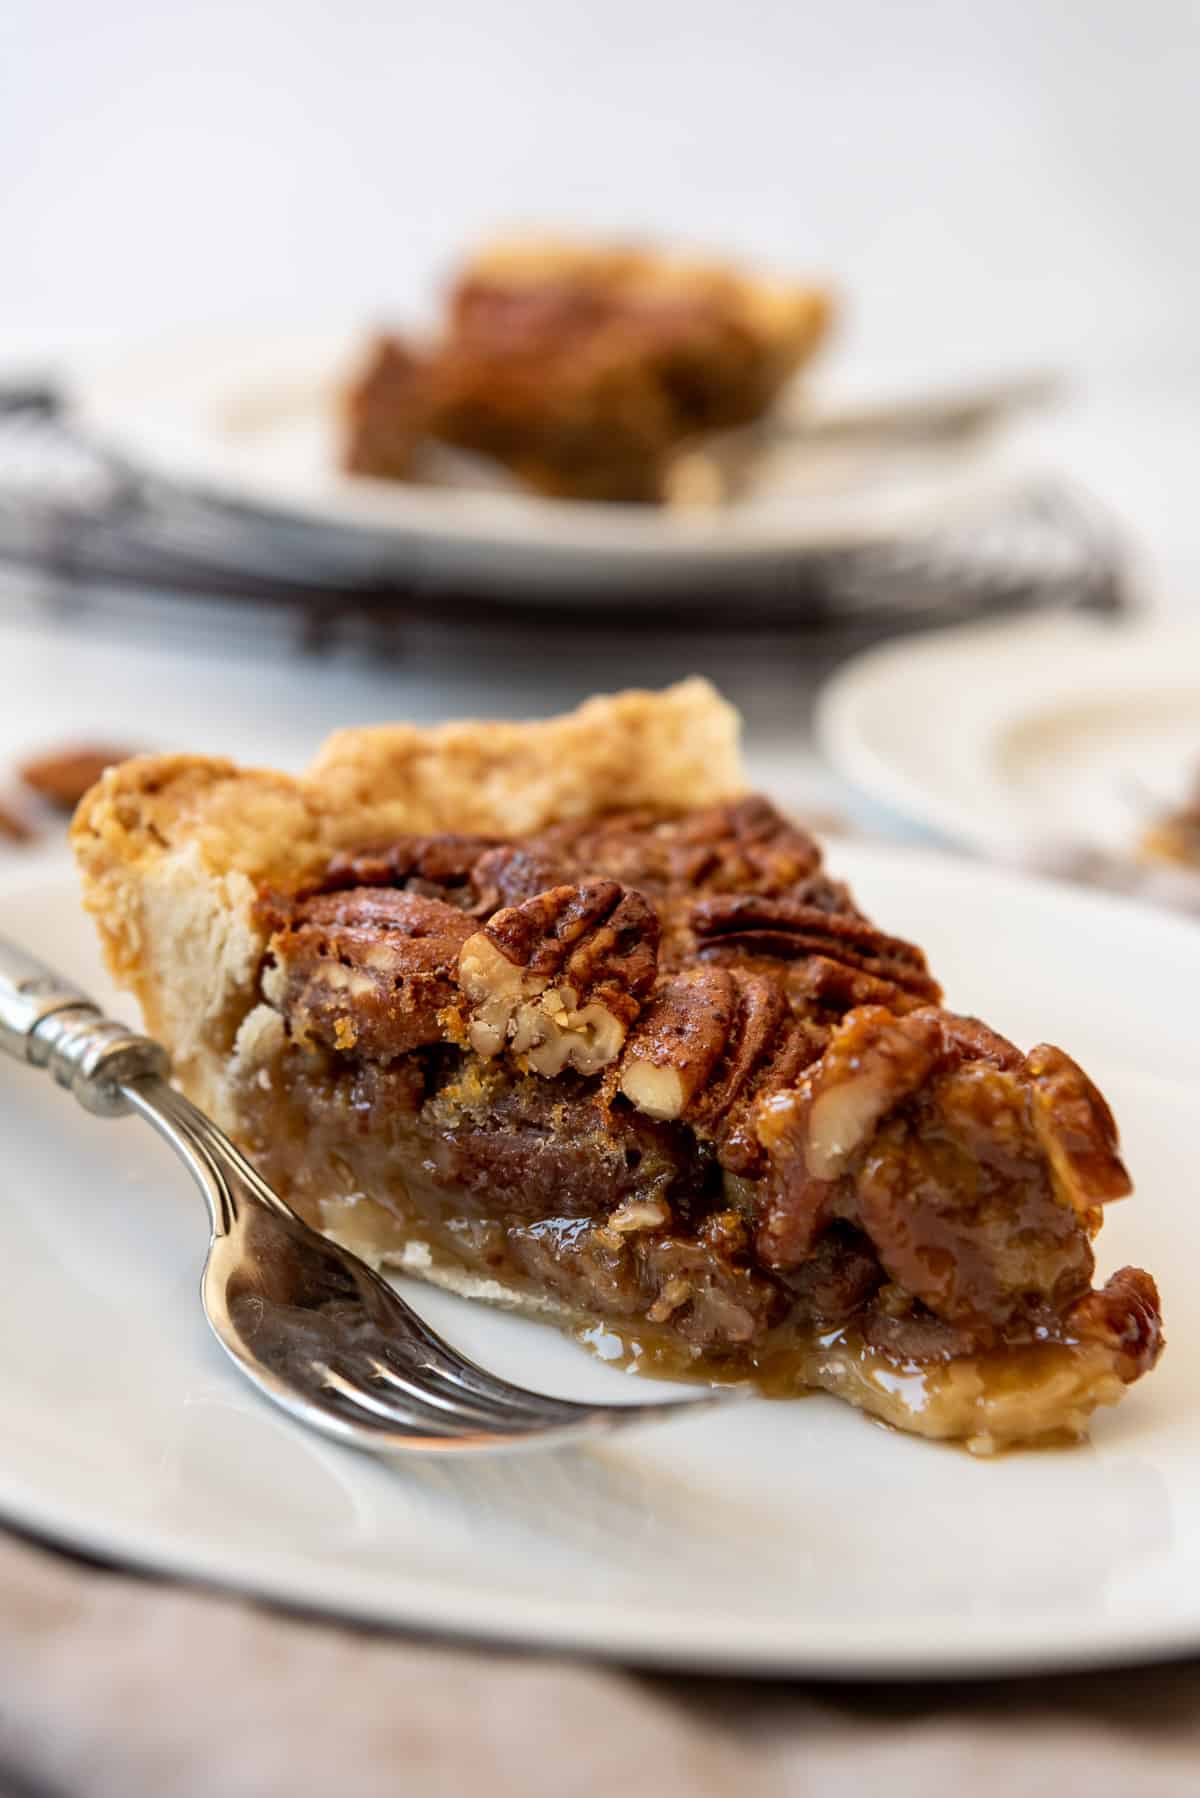 a slice of gooey pecan pie on a plate with a fork.